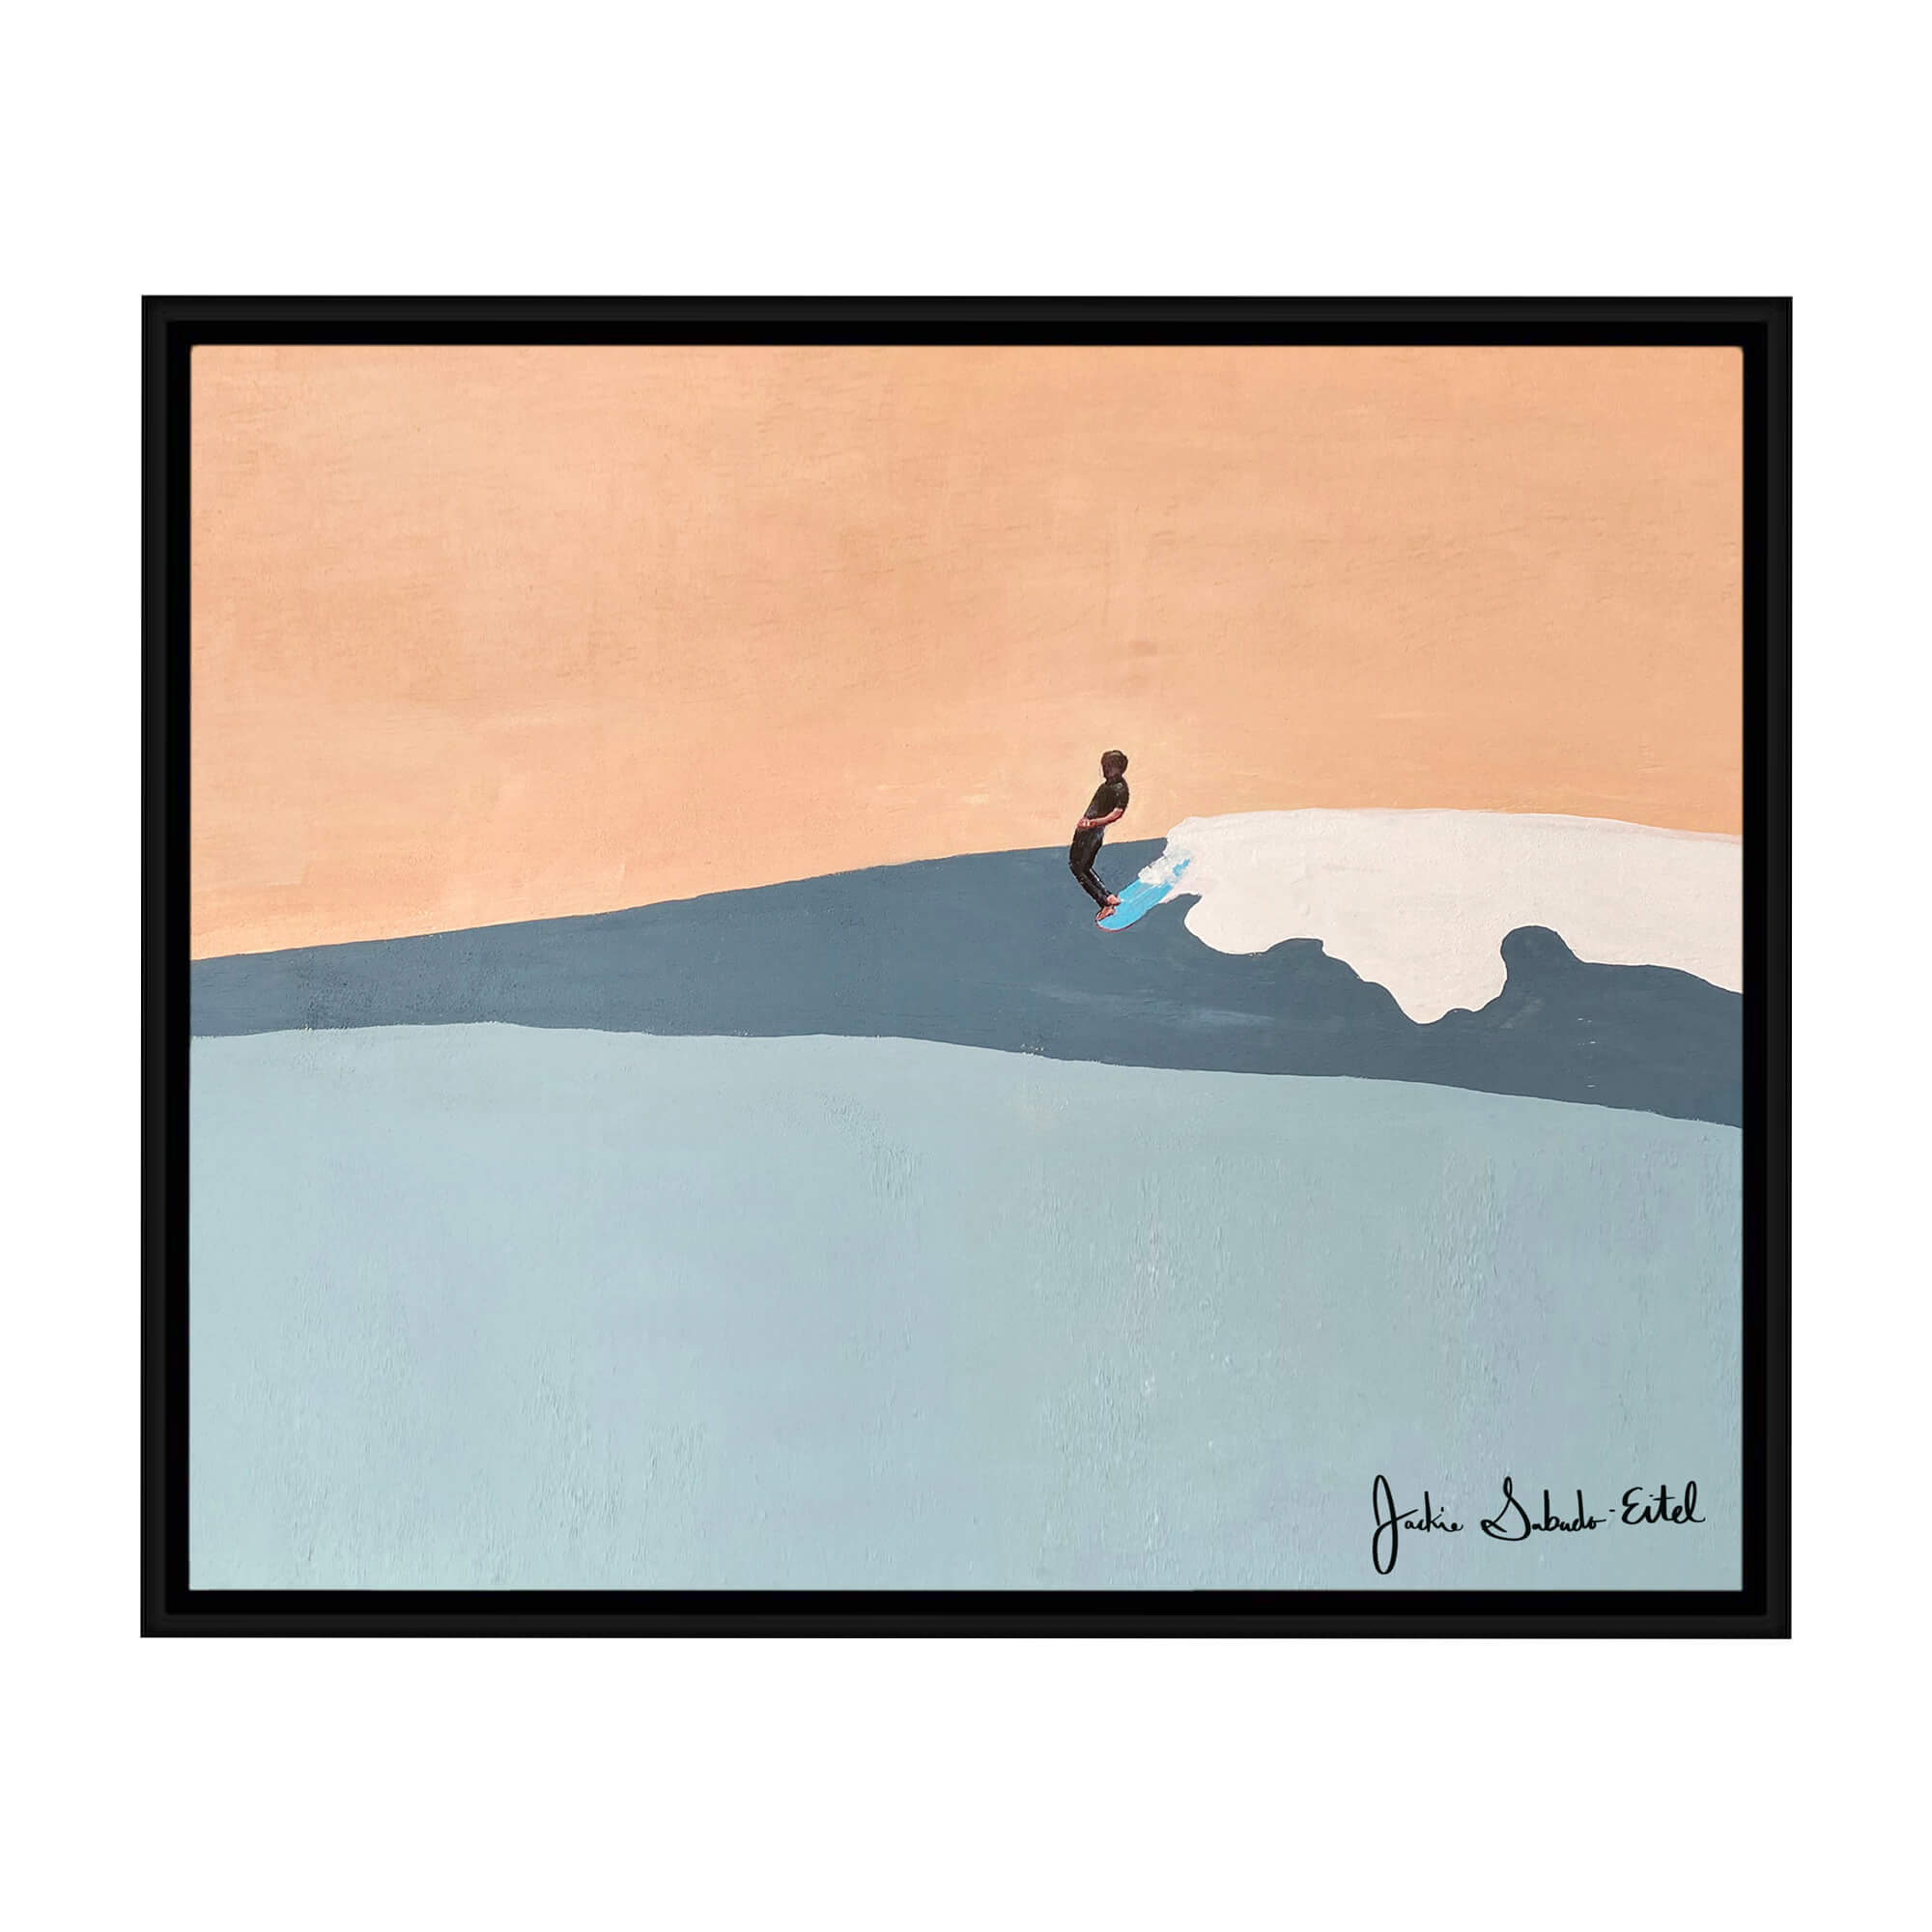 A framed canvas giclée print featuring a man riding the epic waves of Hawaii by Hawaii artist Jackie Eitel